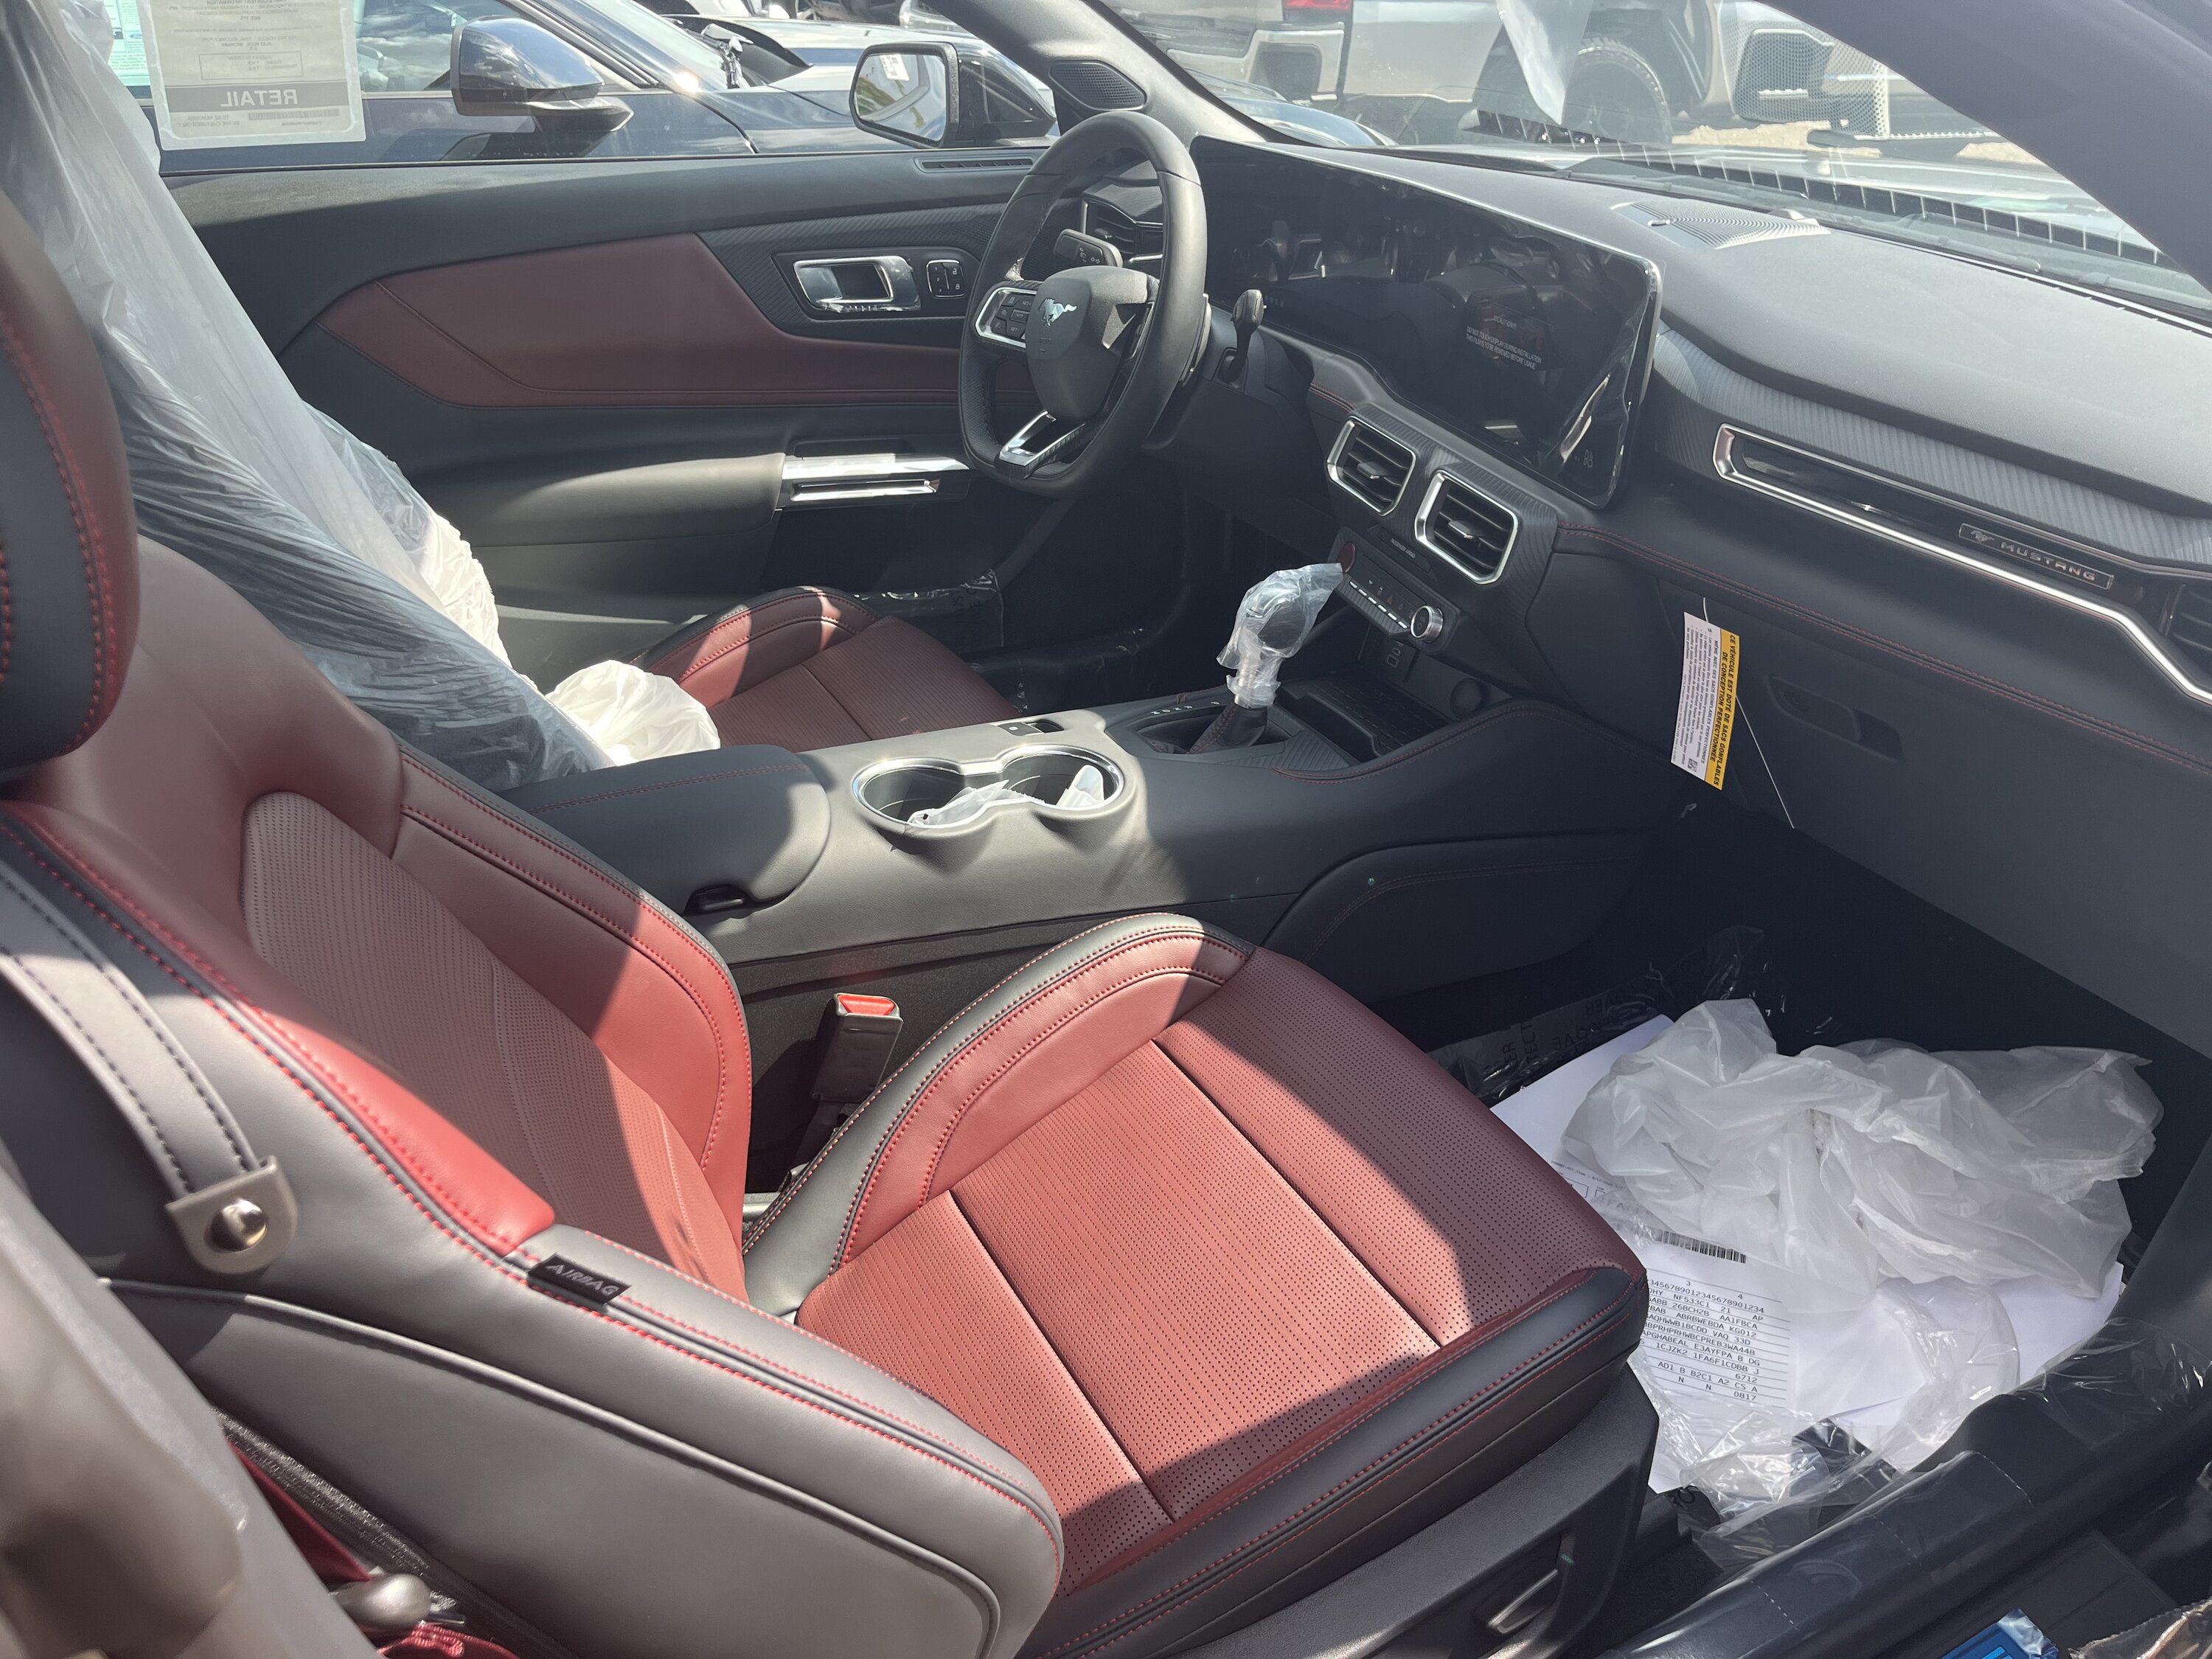 S650 Mustang Let’s post interior photos here! IMG_7928